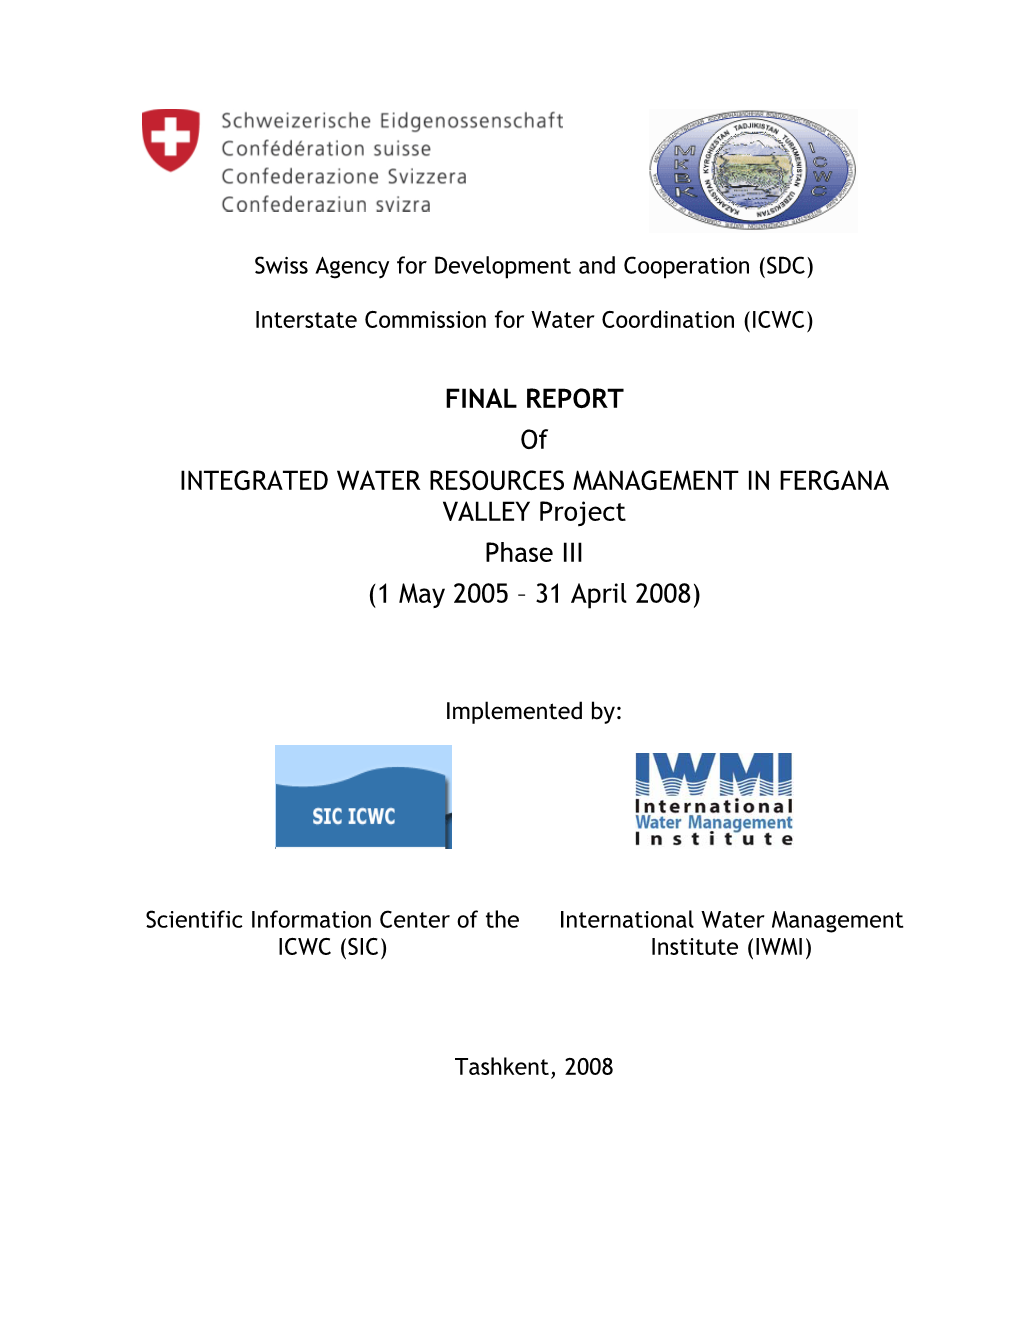 FINAL REPORT of INTEGRATED WATER RESOURCES MANAGEMENT in FERGANA VALLEY Project Phase III (1 May 2005 – 31 April 2008)